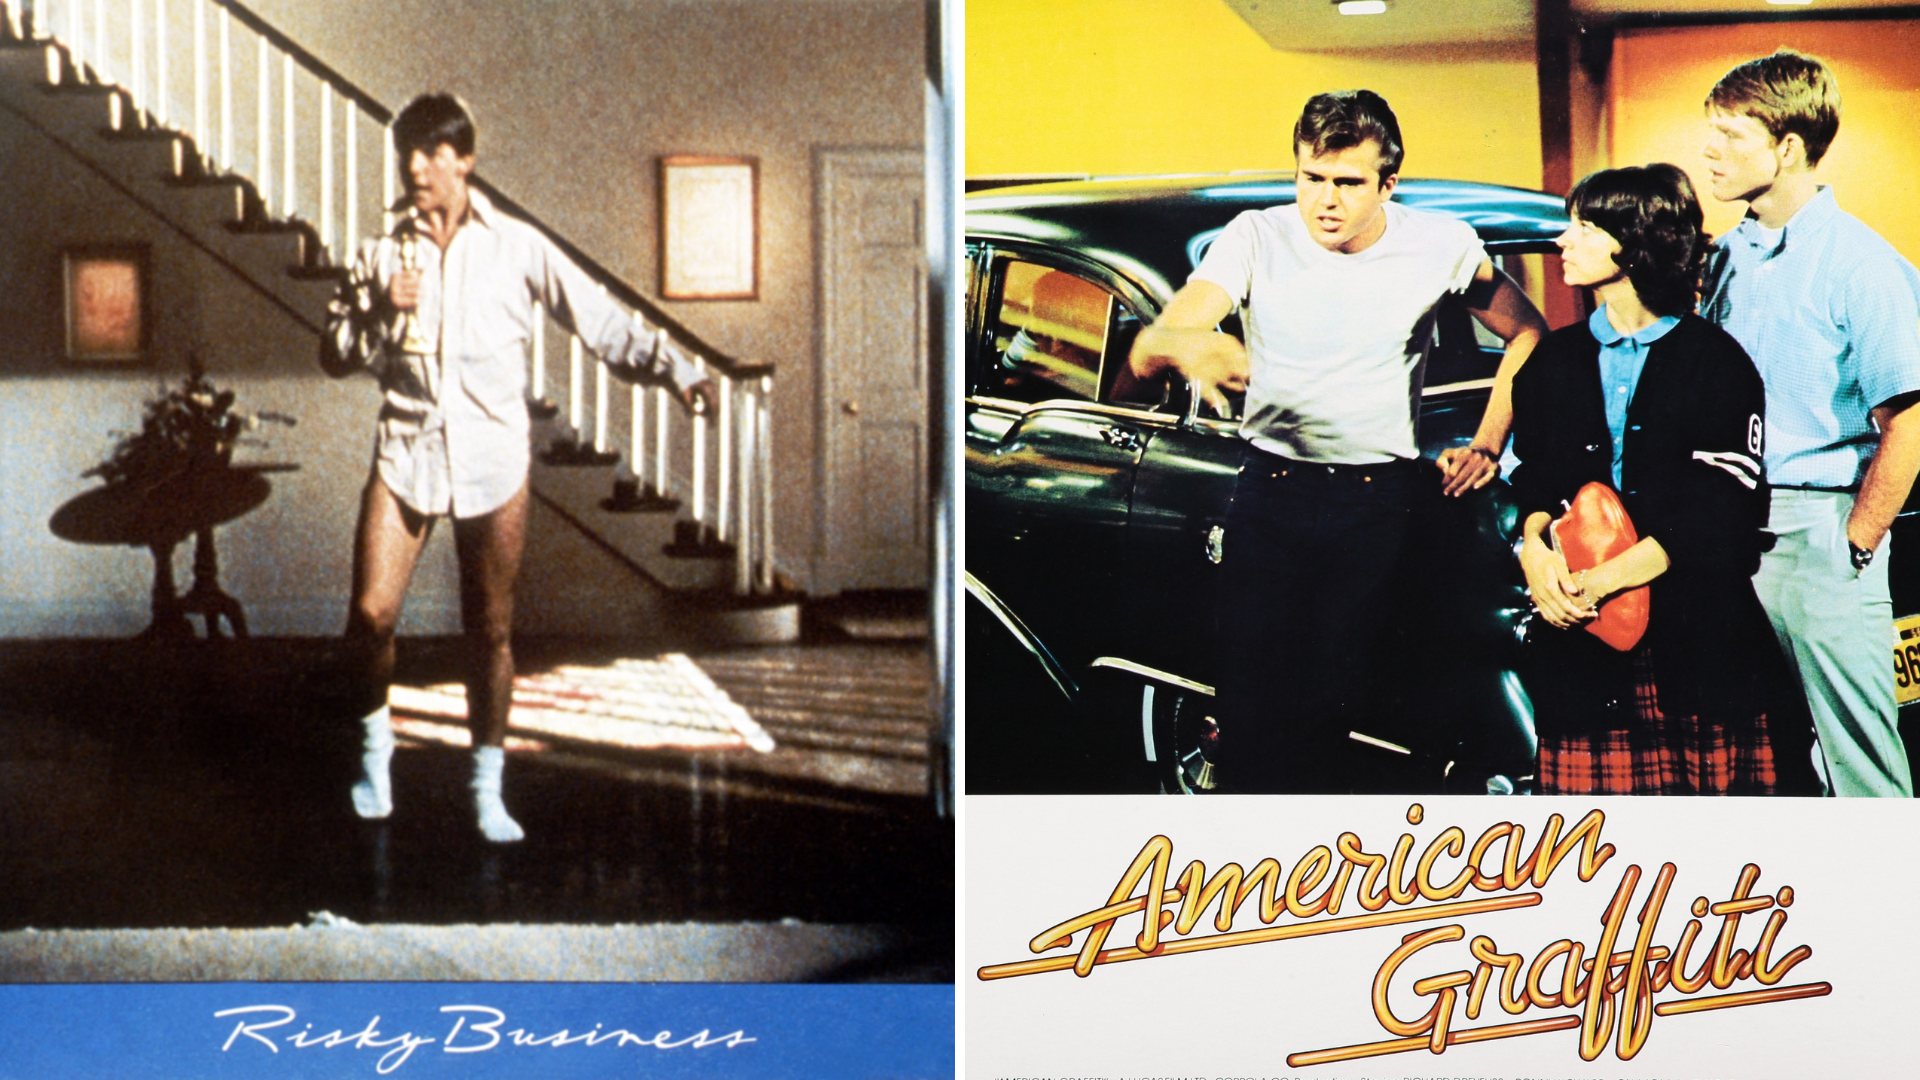 From ‘American Graffiti’ and ‘Risky Business’ to ‘Barbie’ and ‘Oppenheimer’: Summer Is the Smart Movie Season